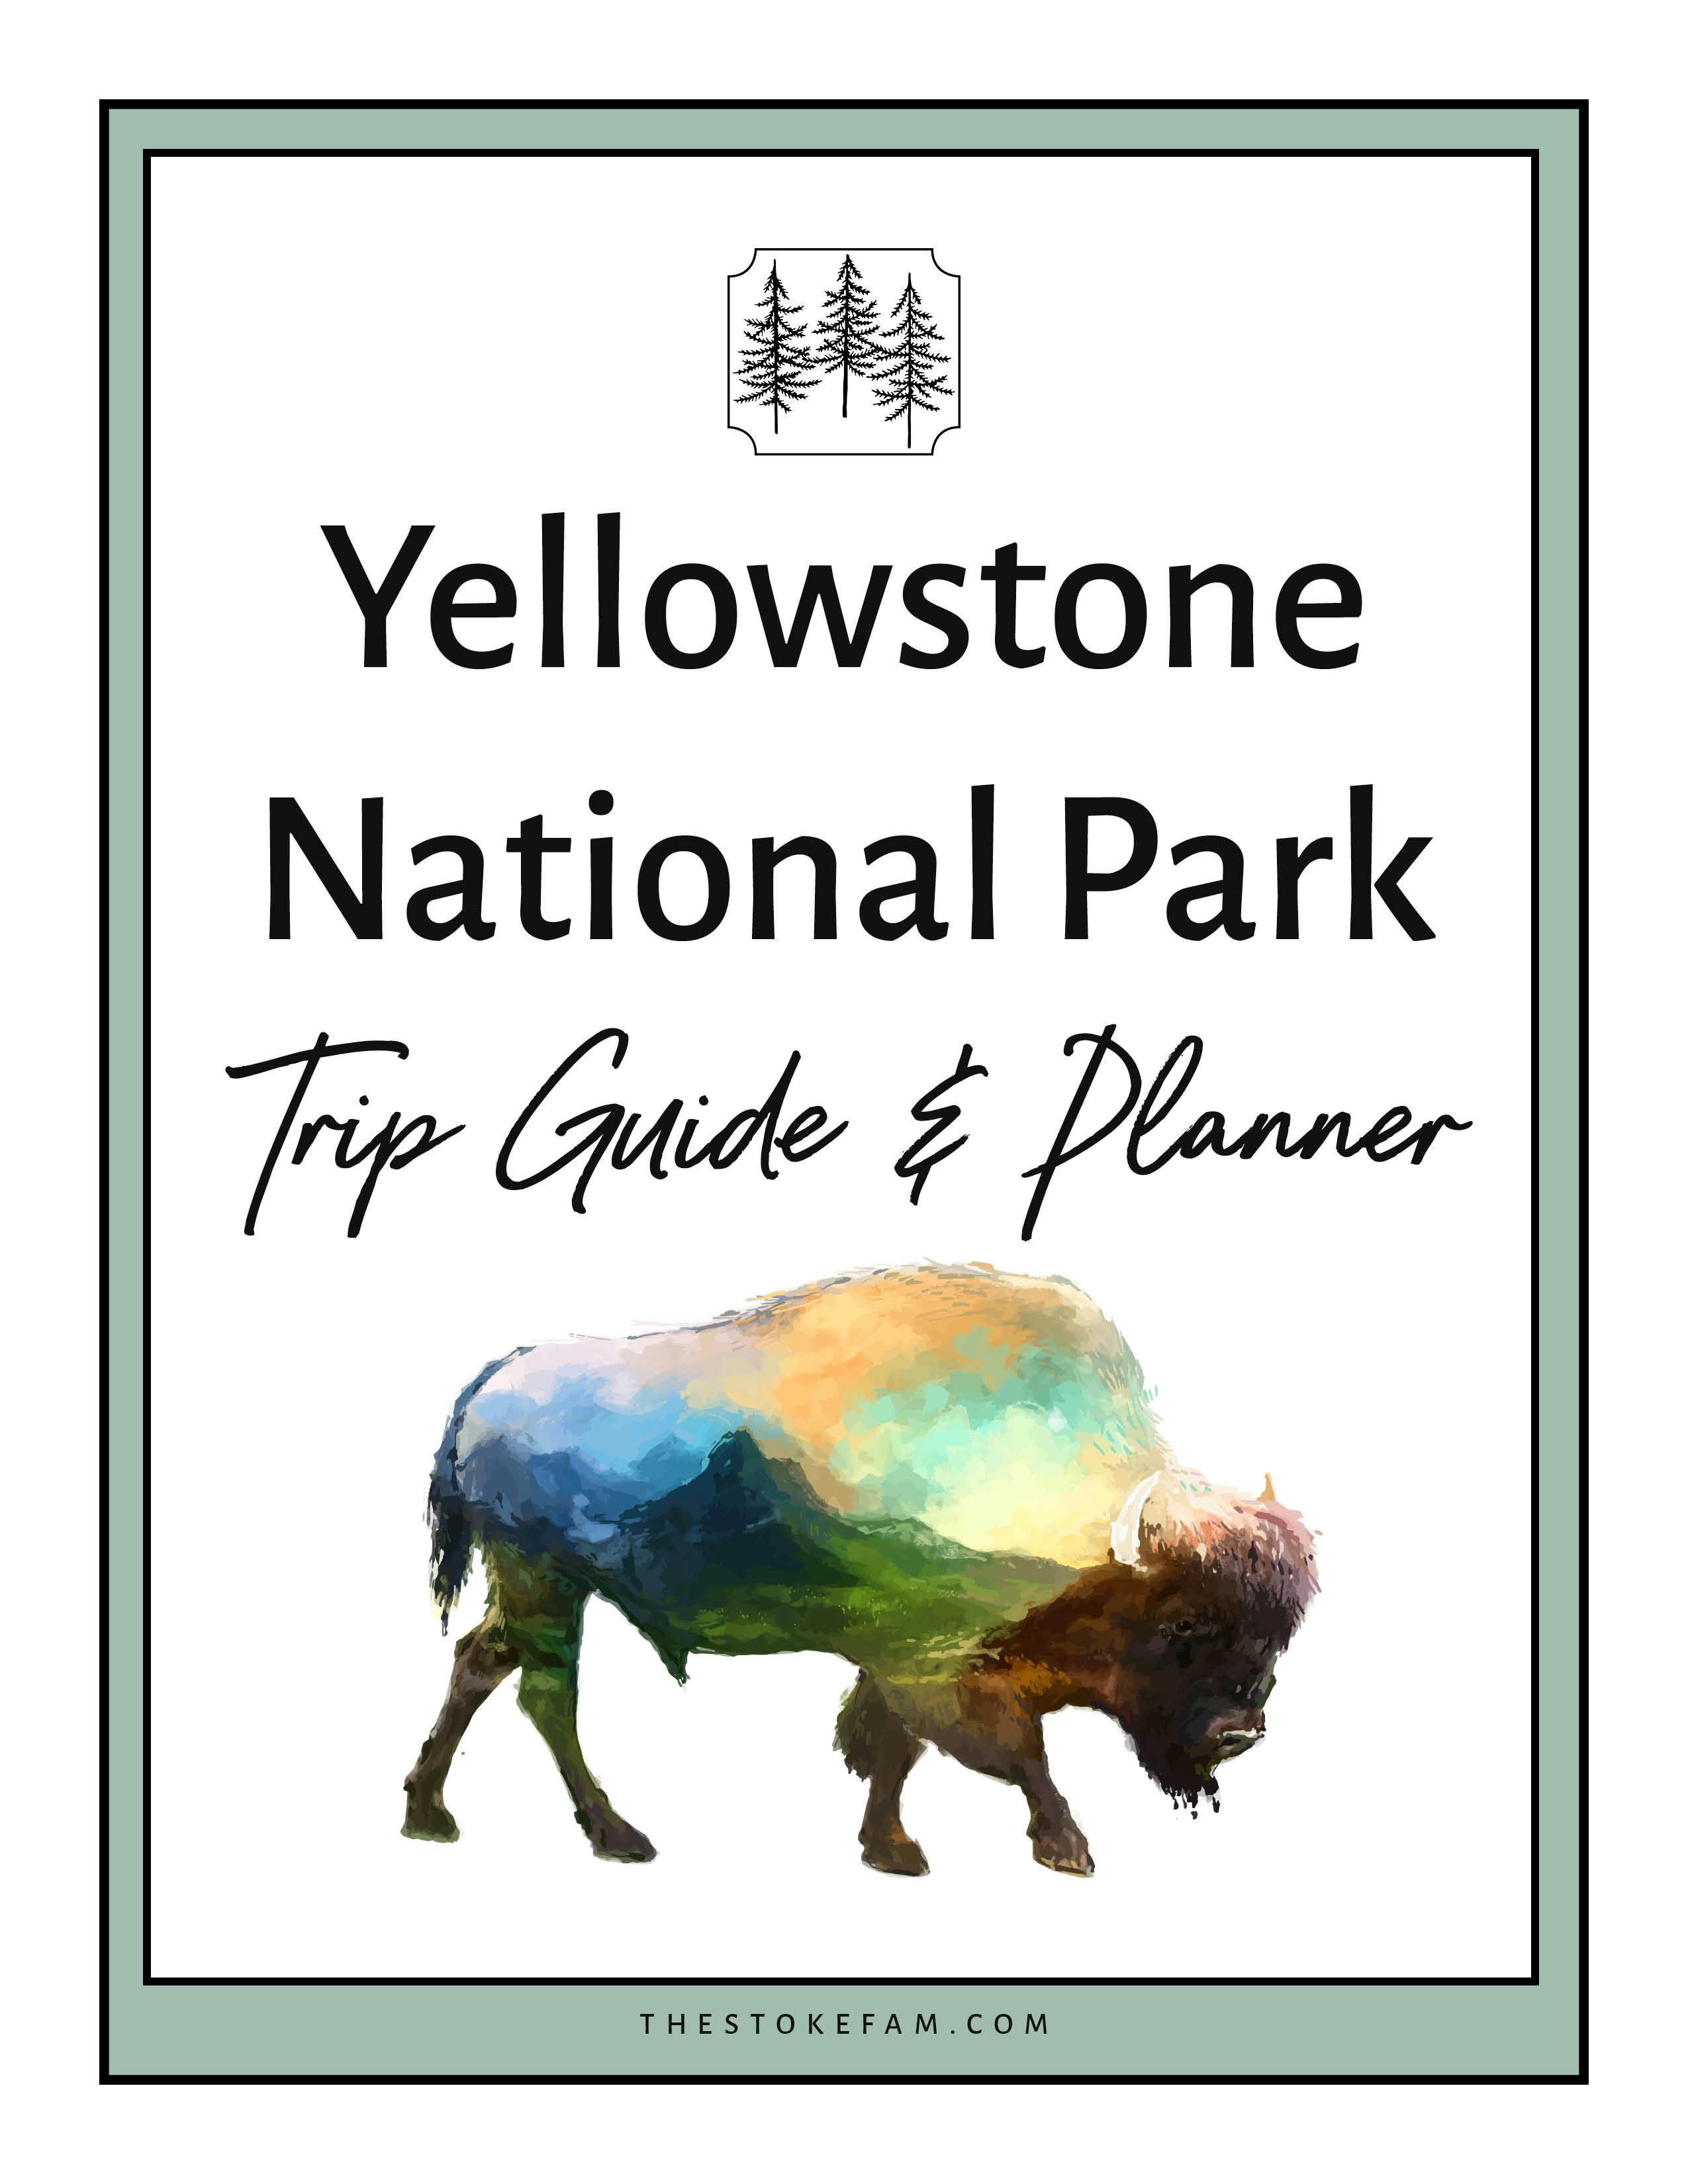 Yellowstone National Park Trip Guide and Planner